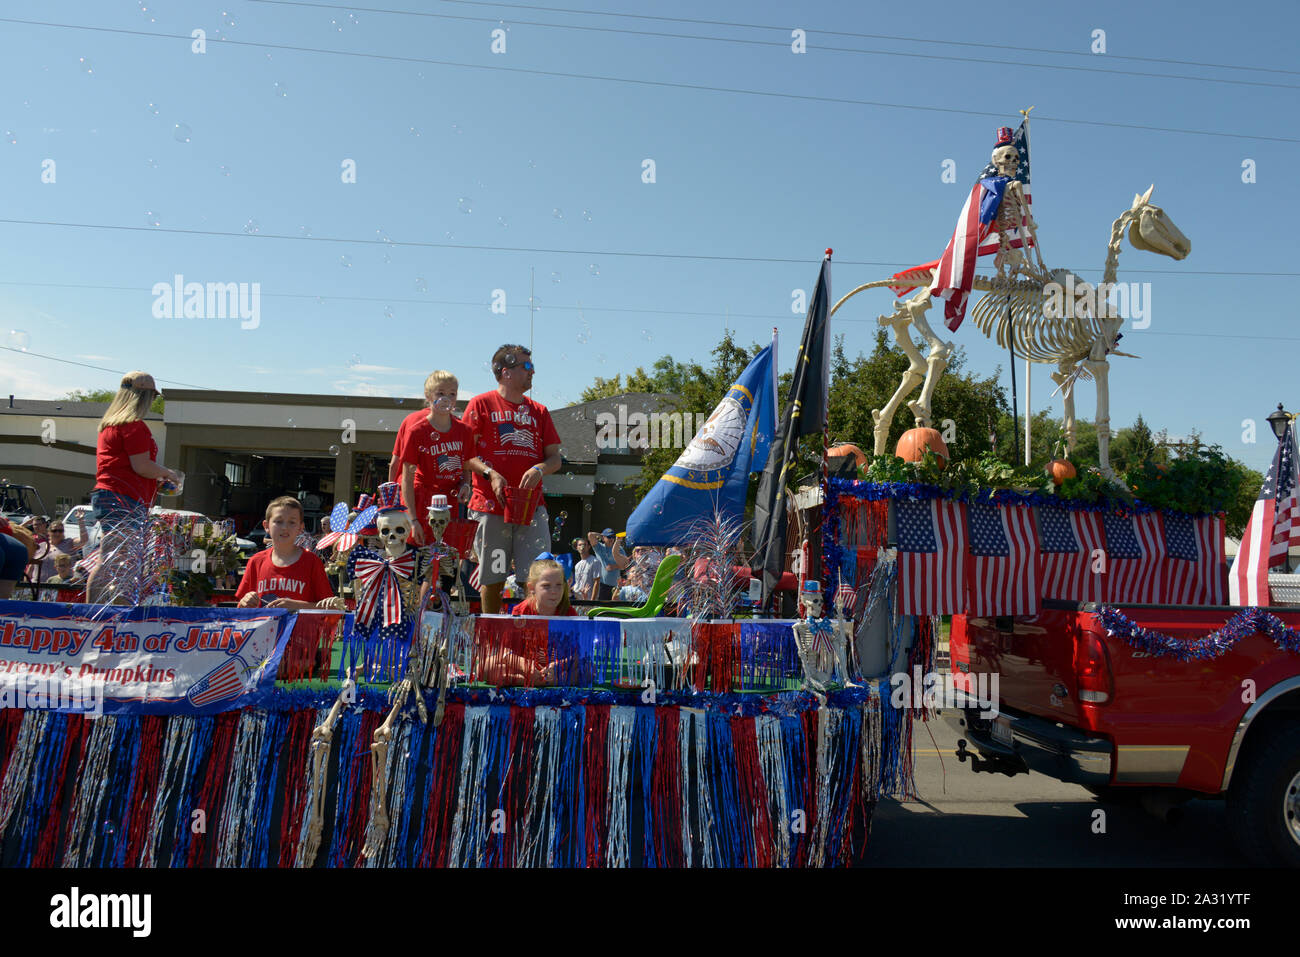 Parade Floats, American flags, Float, July 4, Independence Day, 4th of